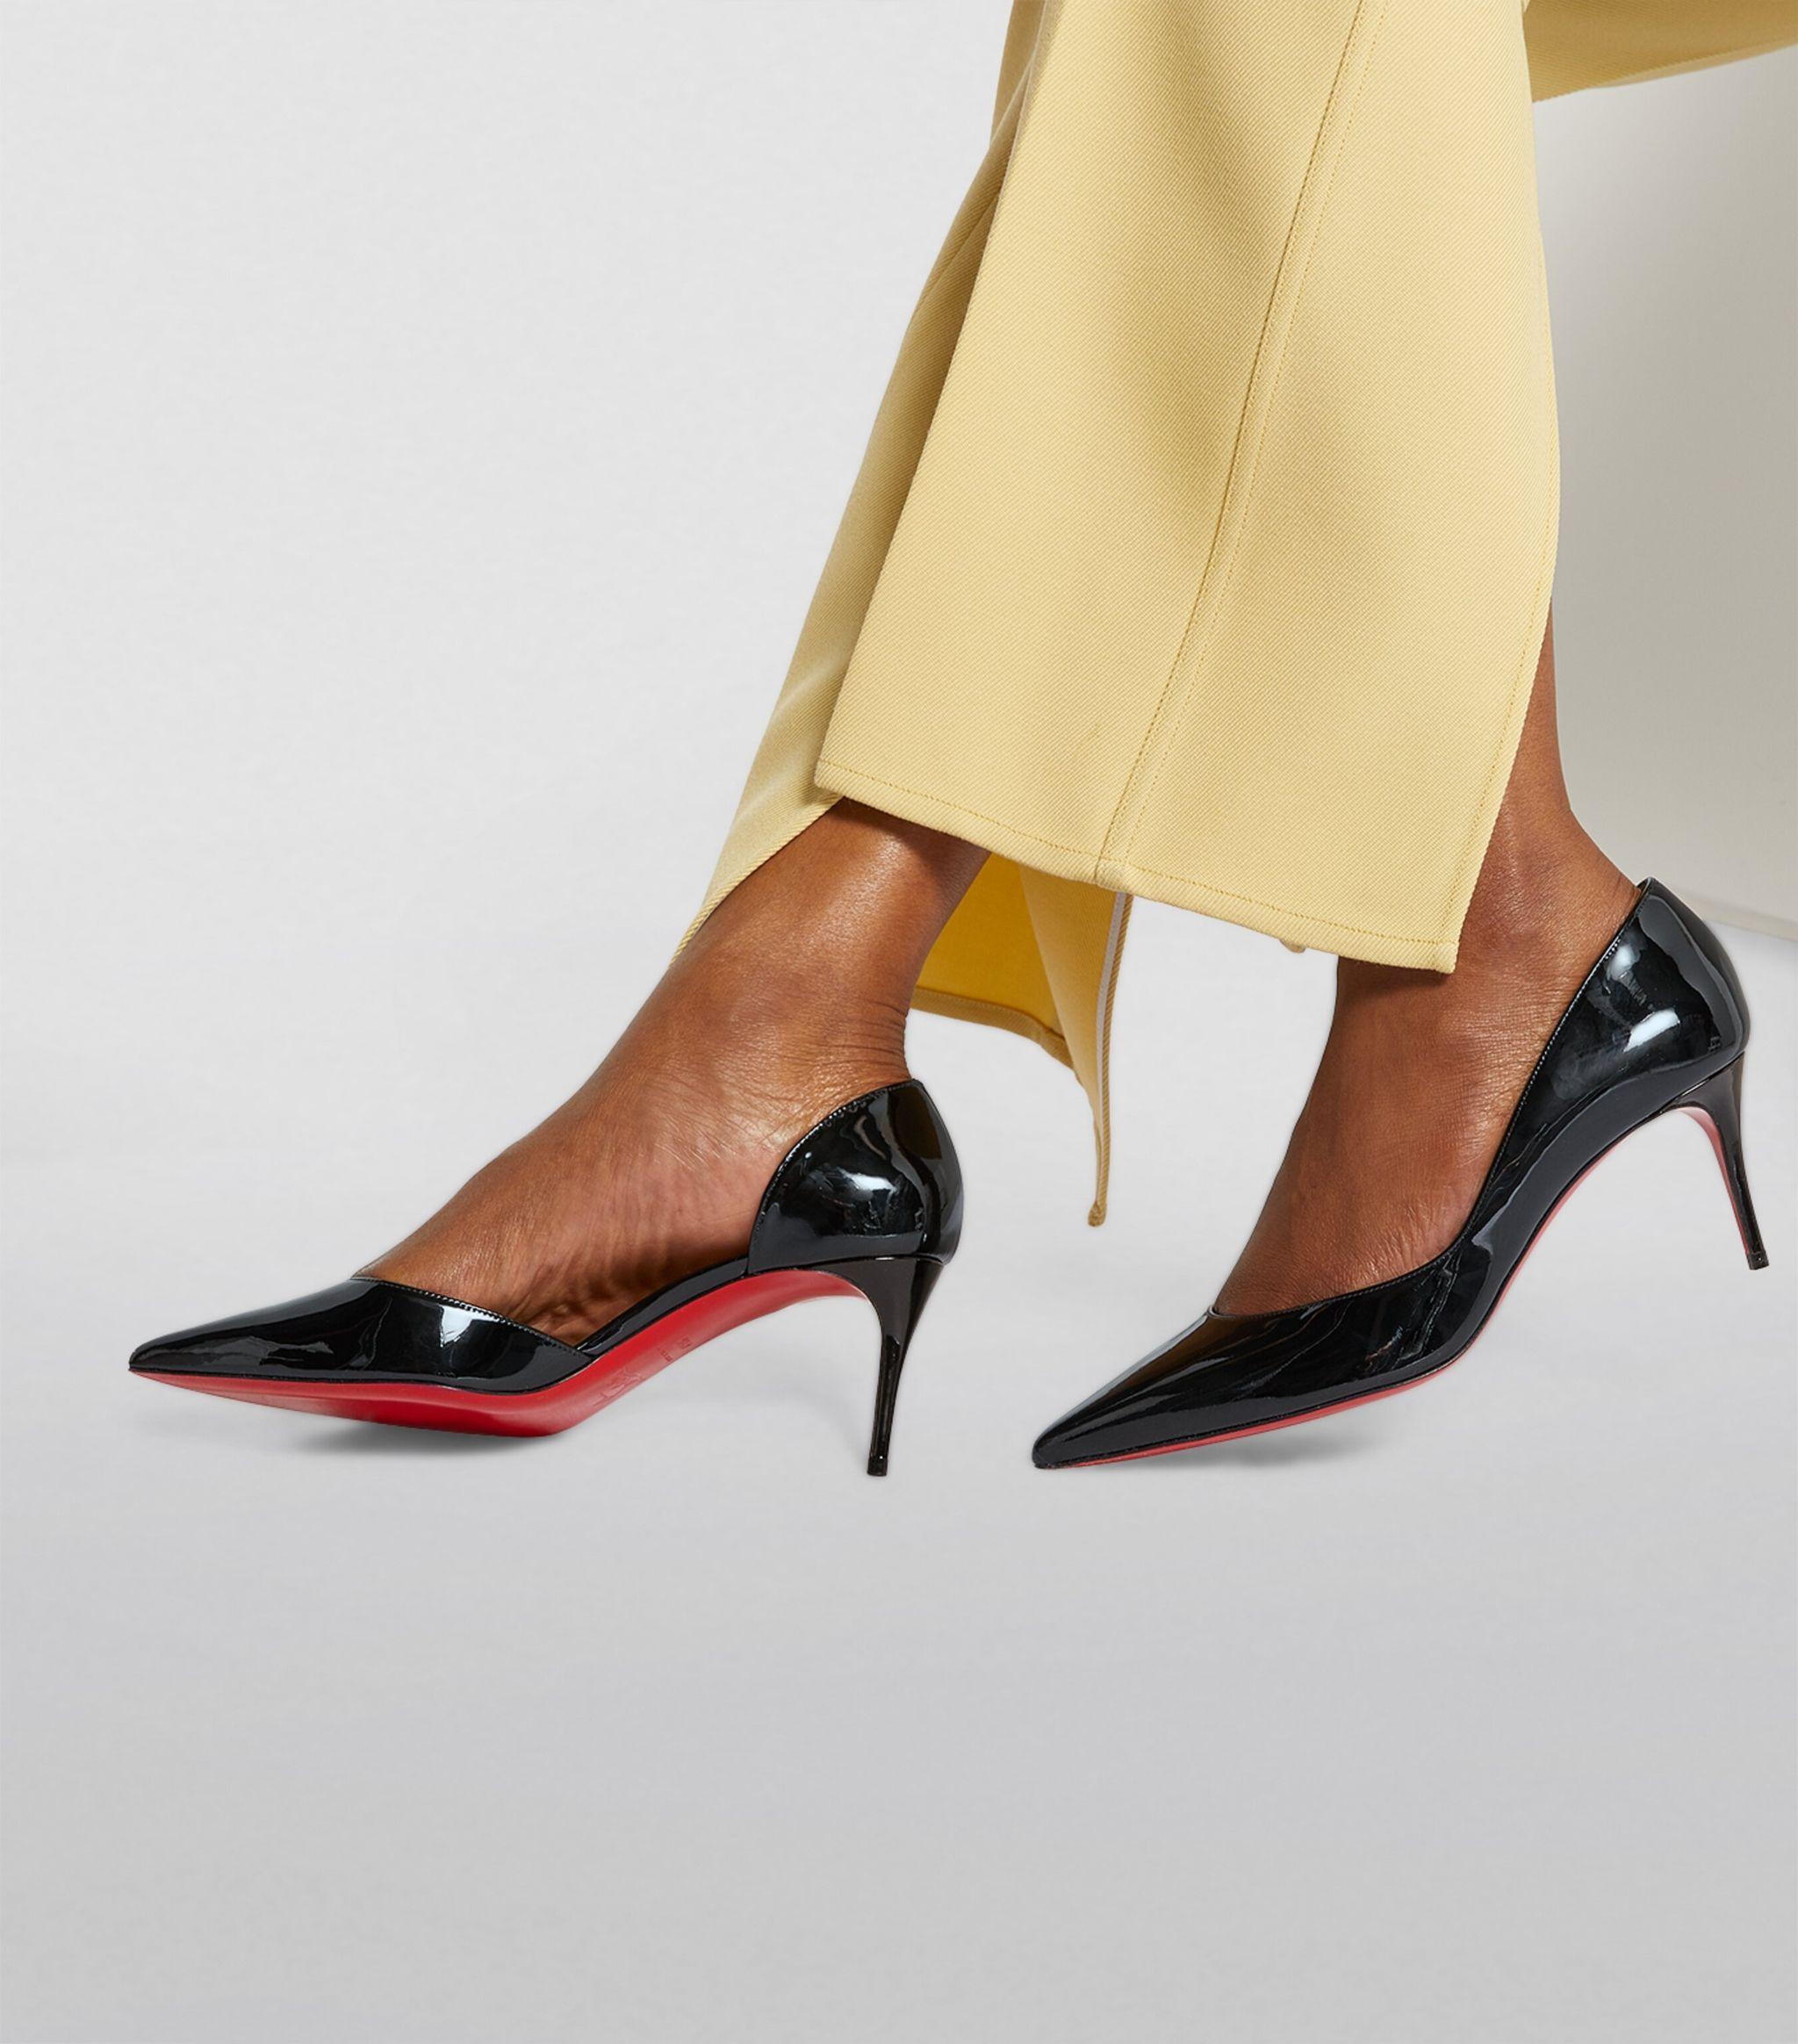 Christian Louboutin Iriza Patent Leather Pumps 70 in Black | Lyst